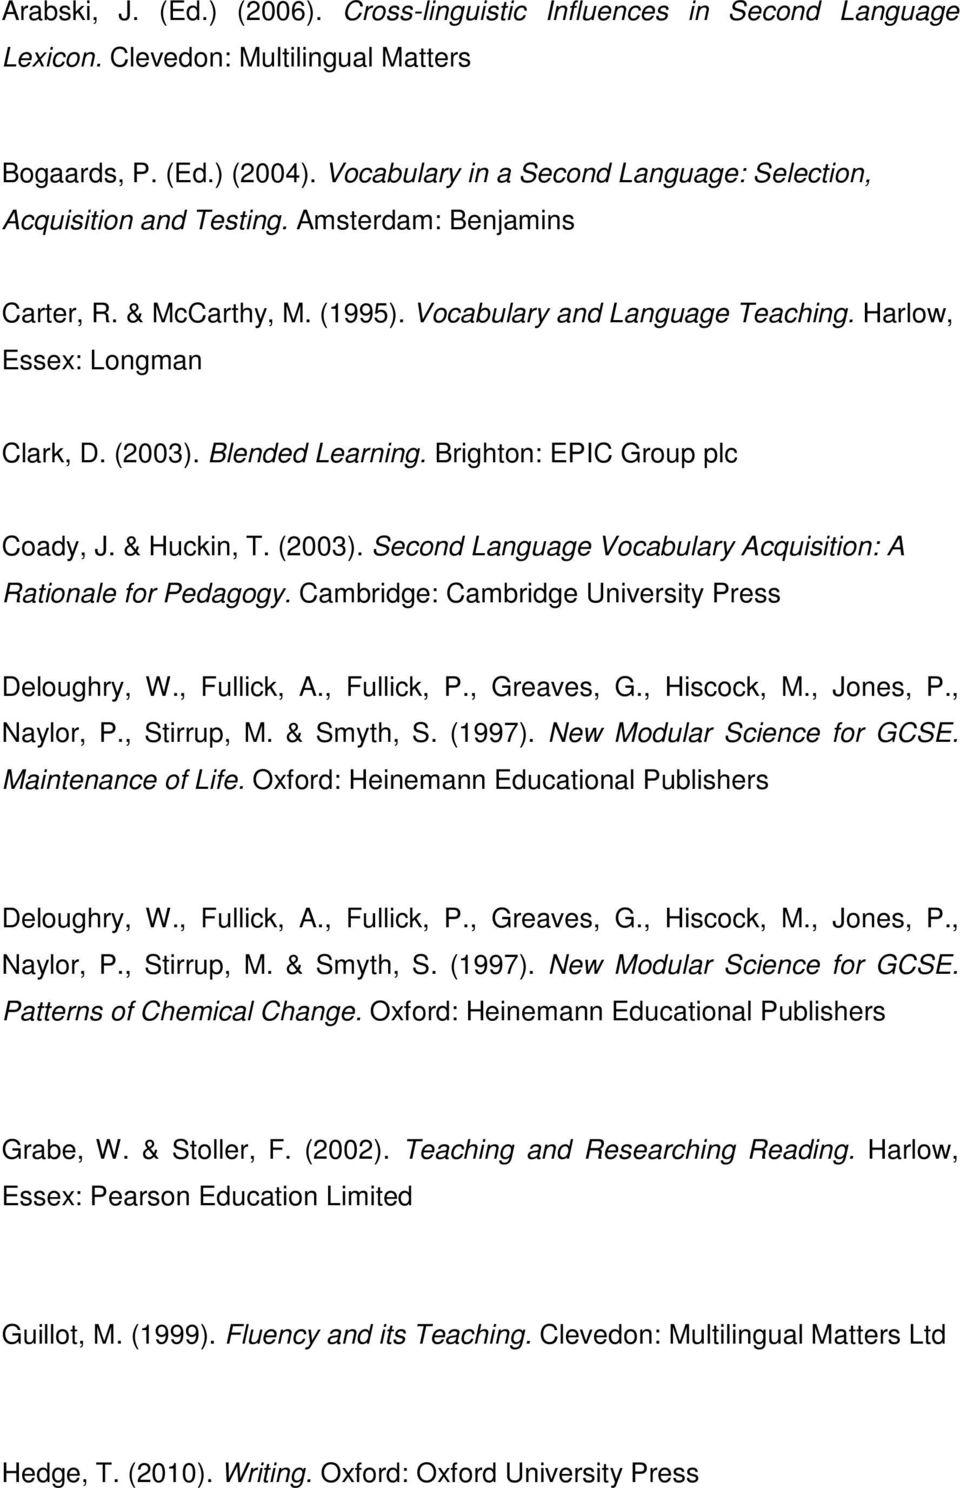 Blended Learning. Brighton: EPIC Group plc Coady, J. & Huckin, T. (2003). Second Language Vocabulary Acquisition: A Rationale for Pedagogy. Cambridge: Cambridge University Press Deloughry, W.